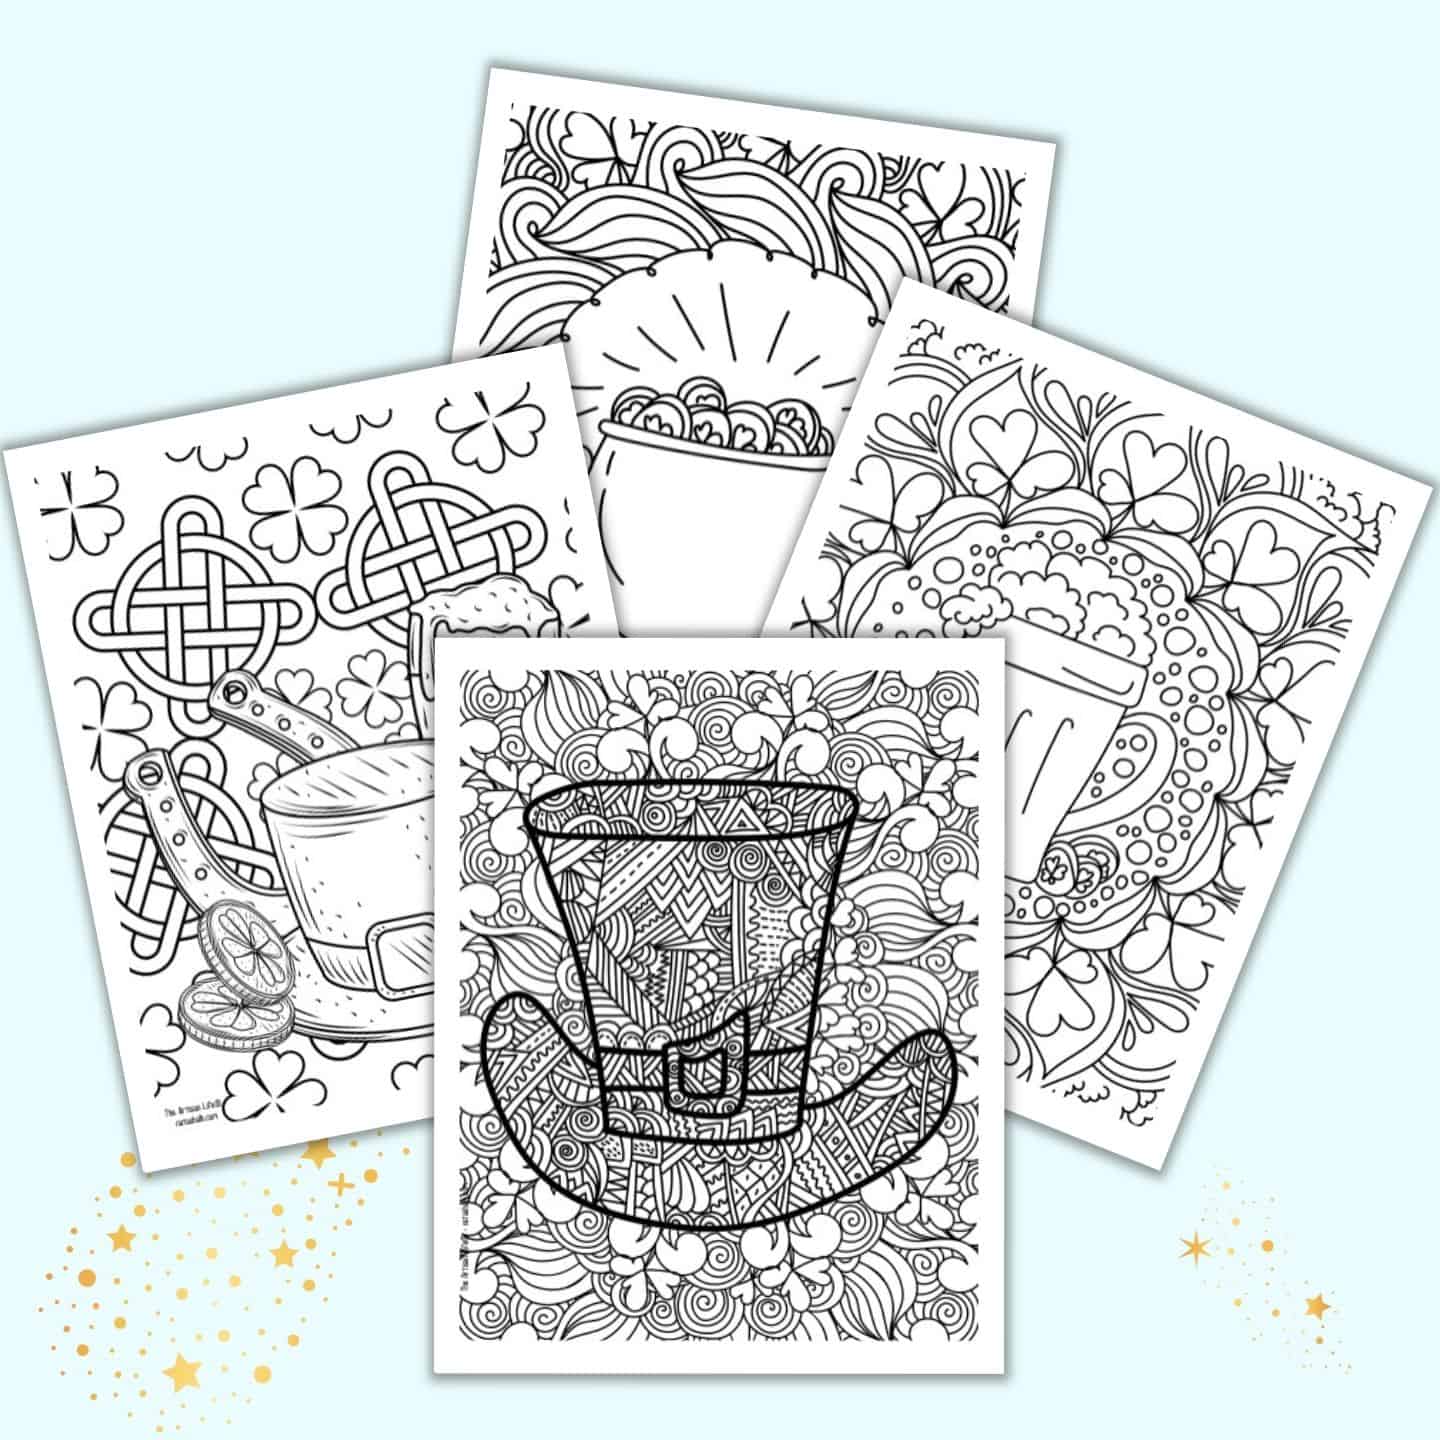 Free printable st patricks day coloring pages for adults